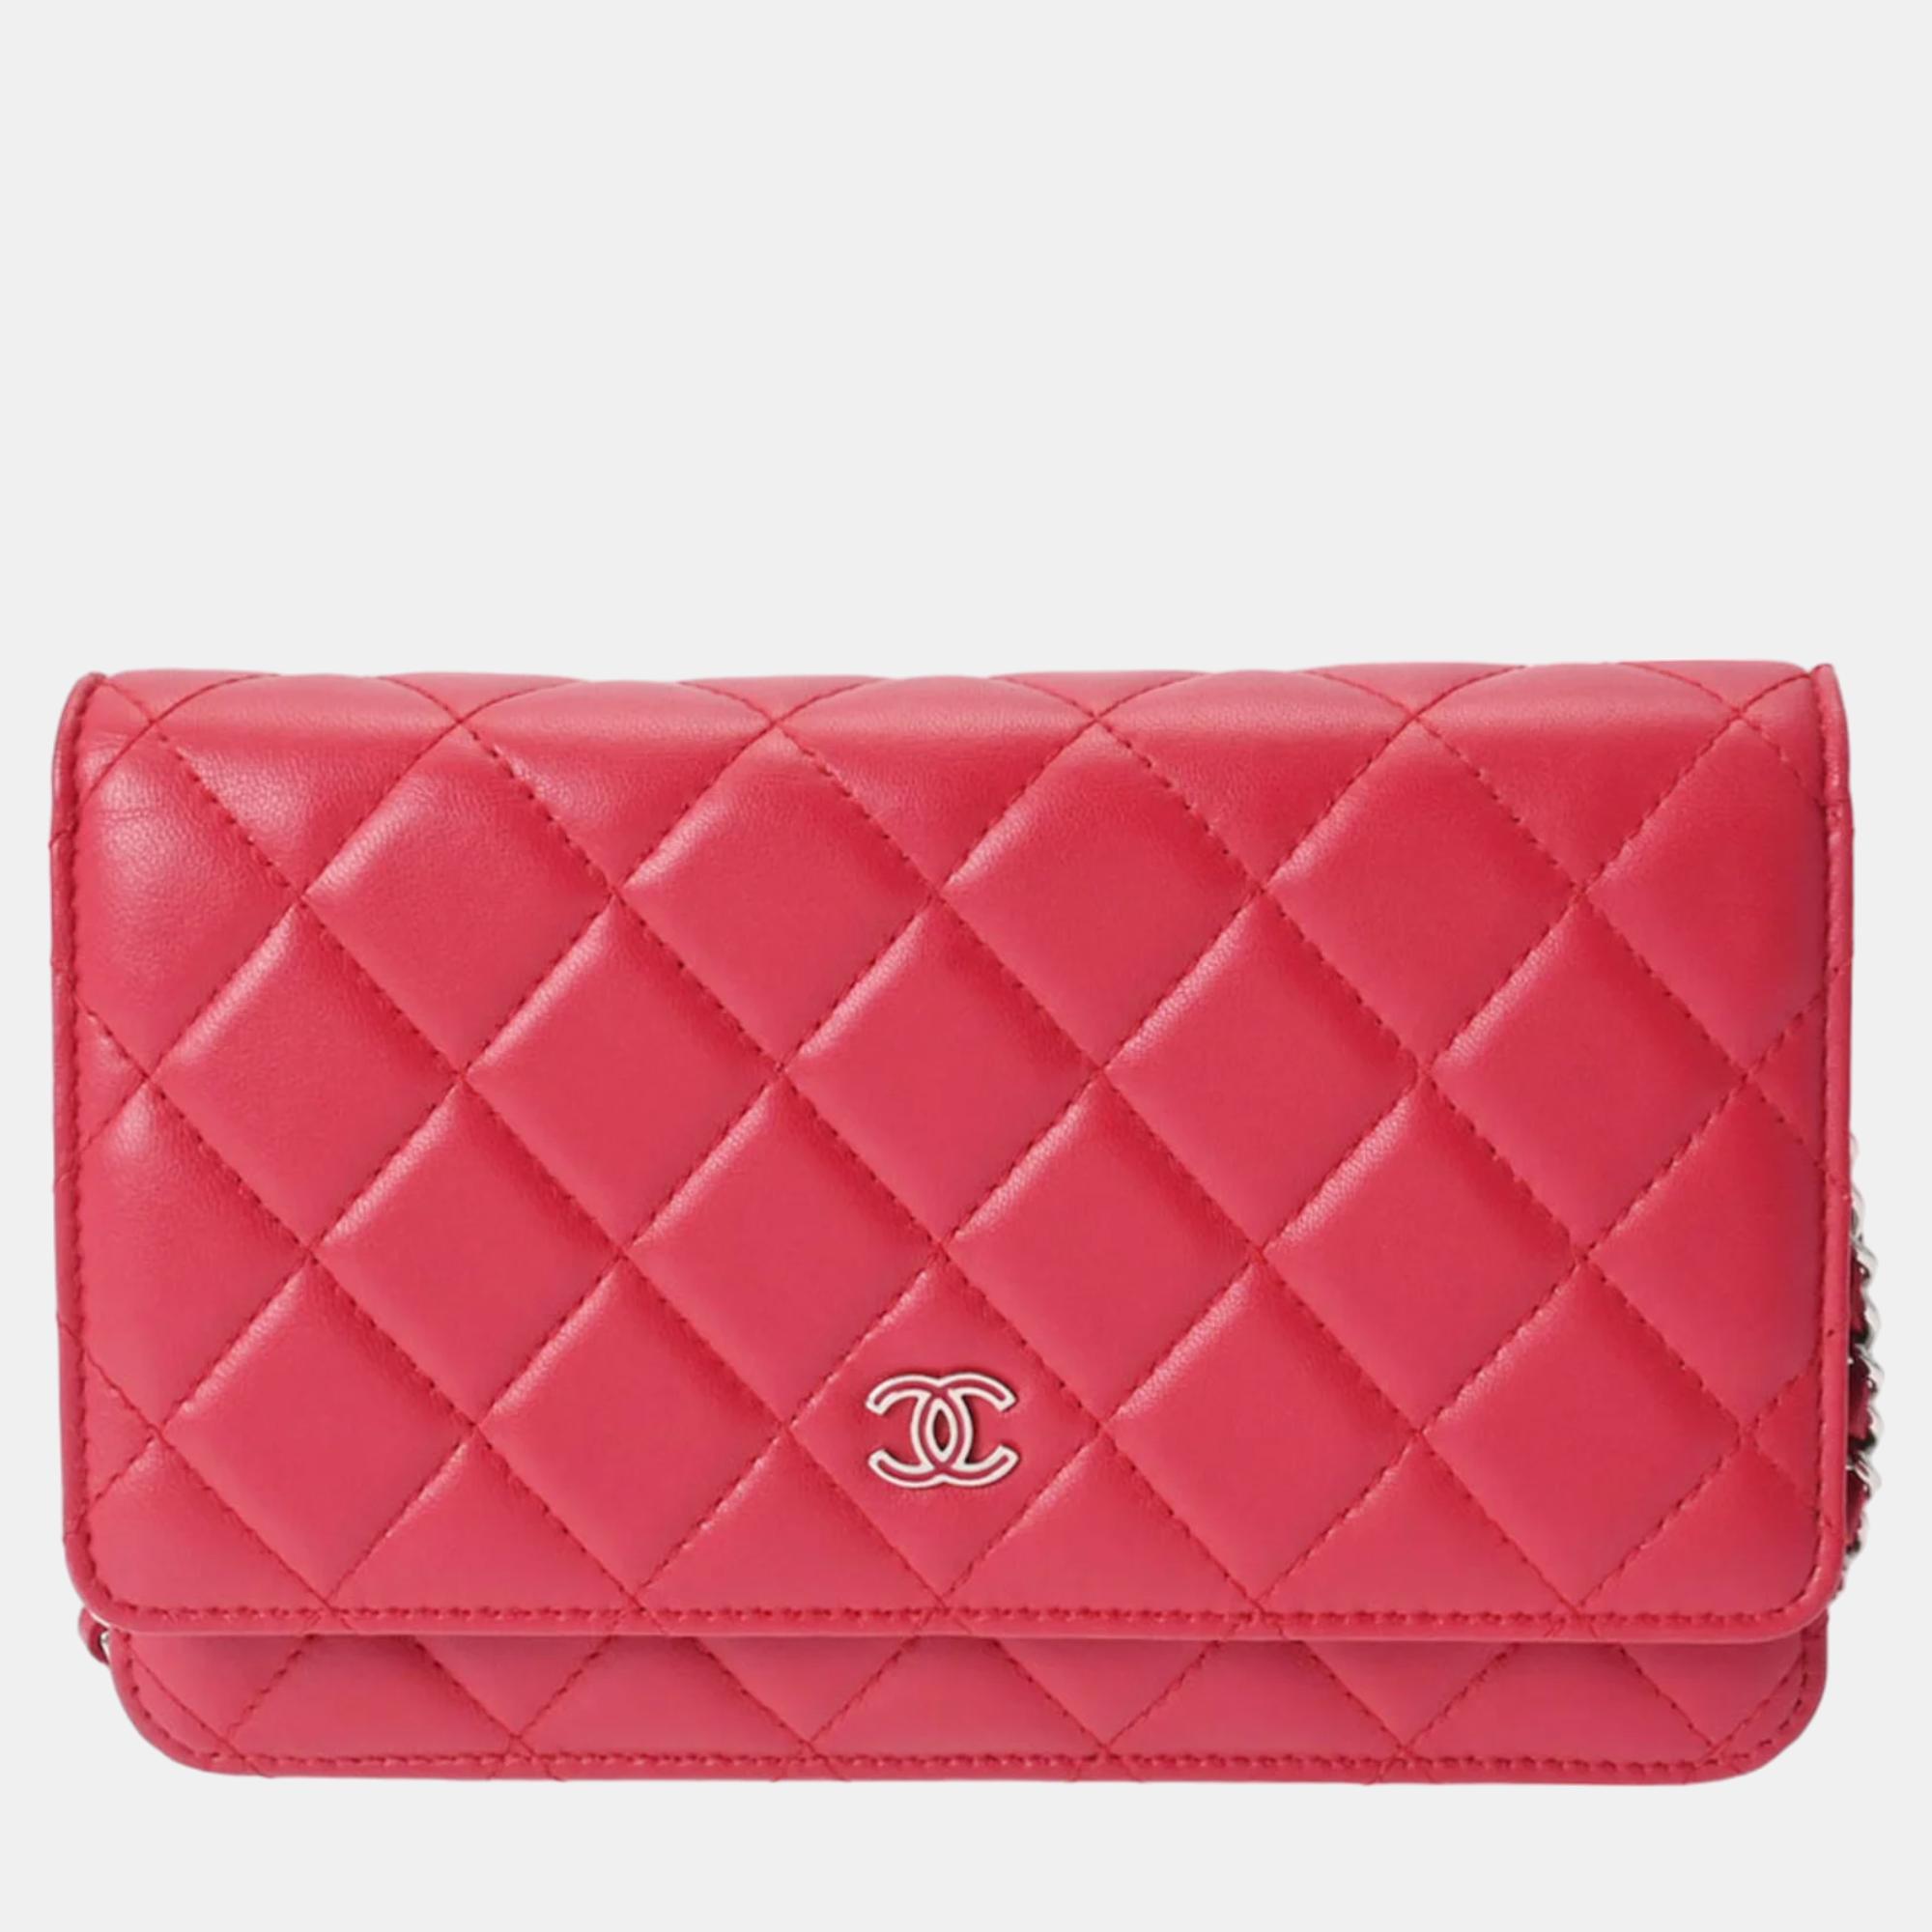 Chanel pink leather classic wallet on chain